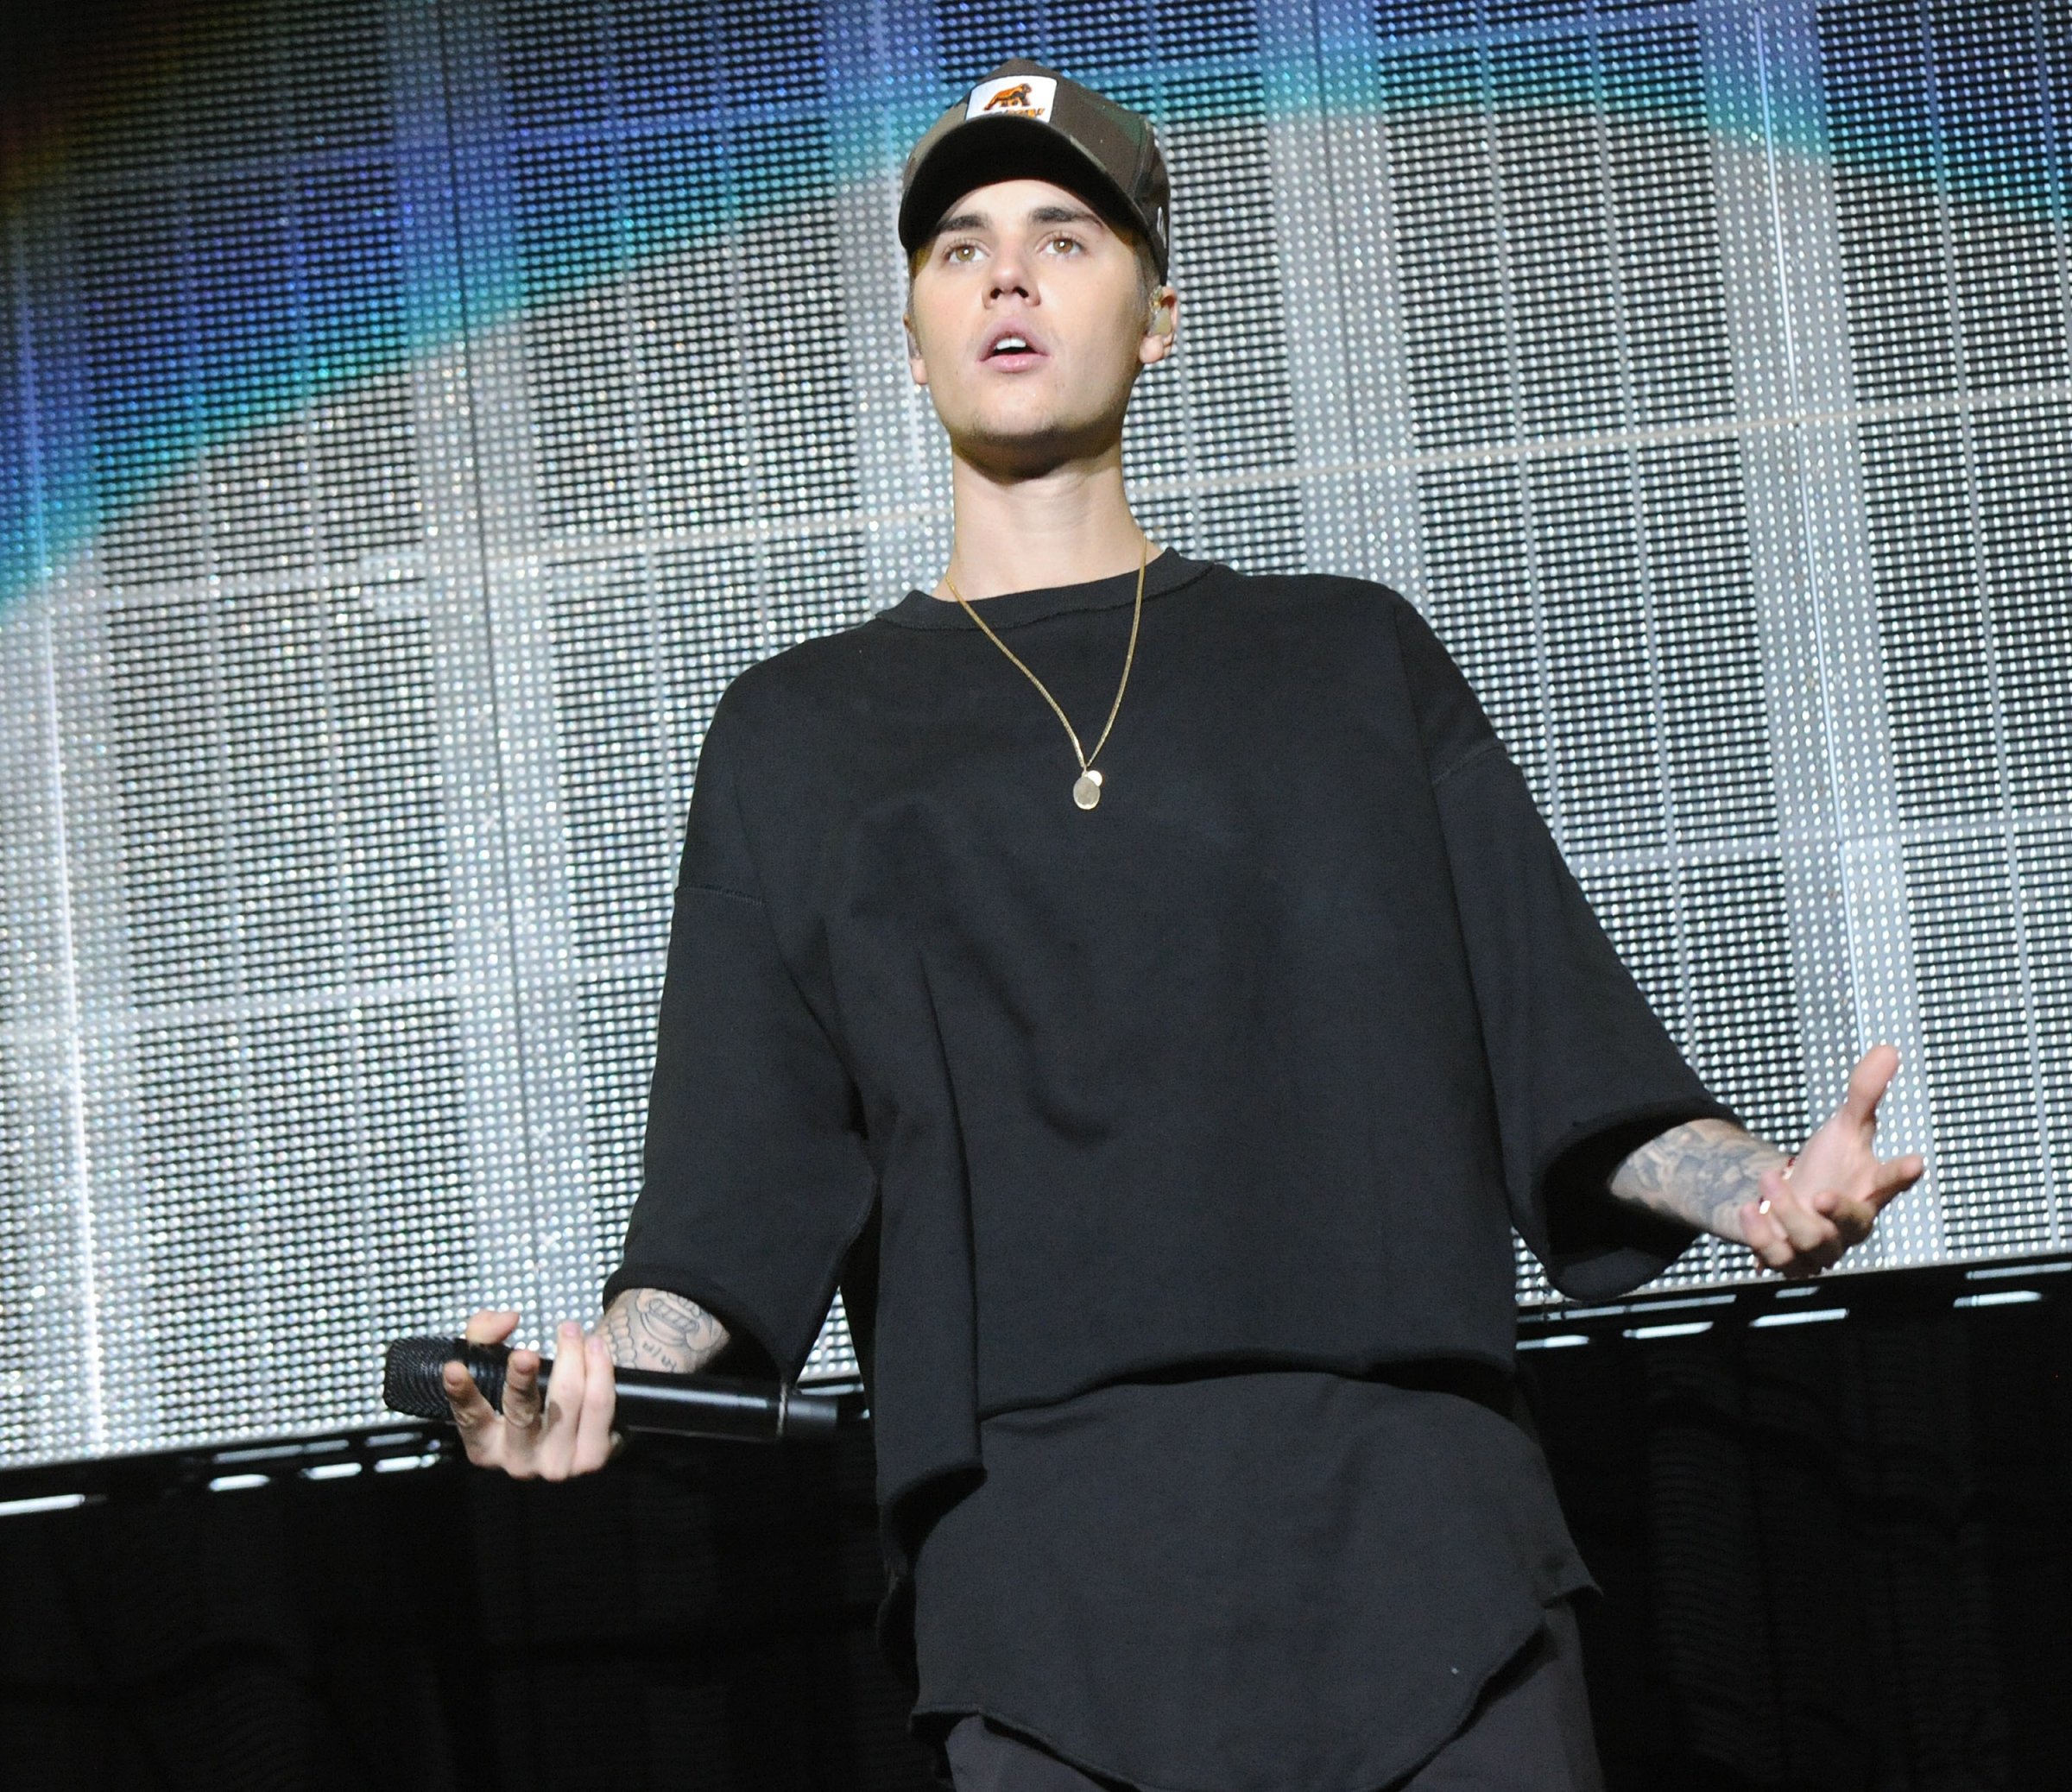 ustin Bieber performs during Power 96.1's Jingle Ball 2015 at Philips Arena on December 17, 2015 in Atlanta, Georgia.